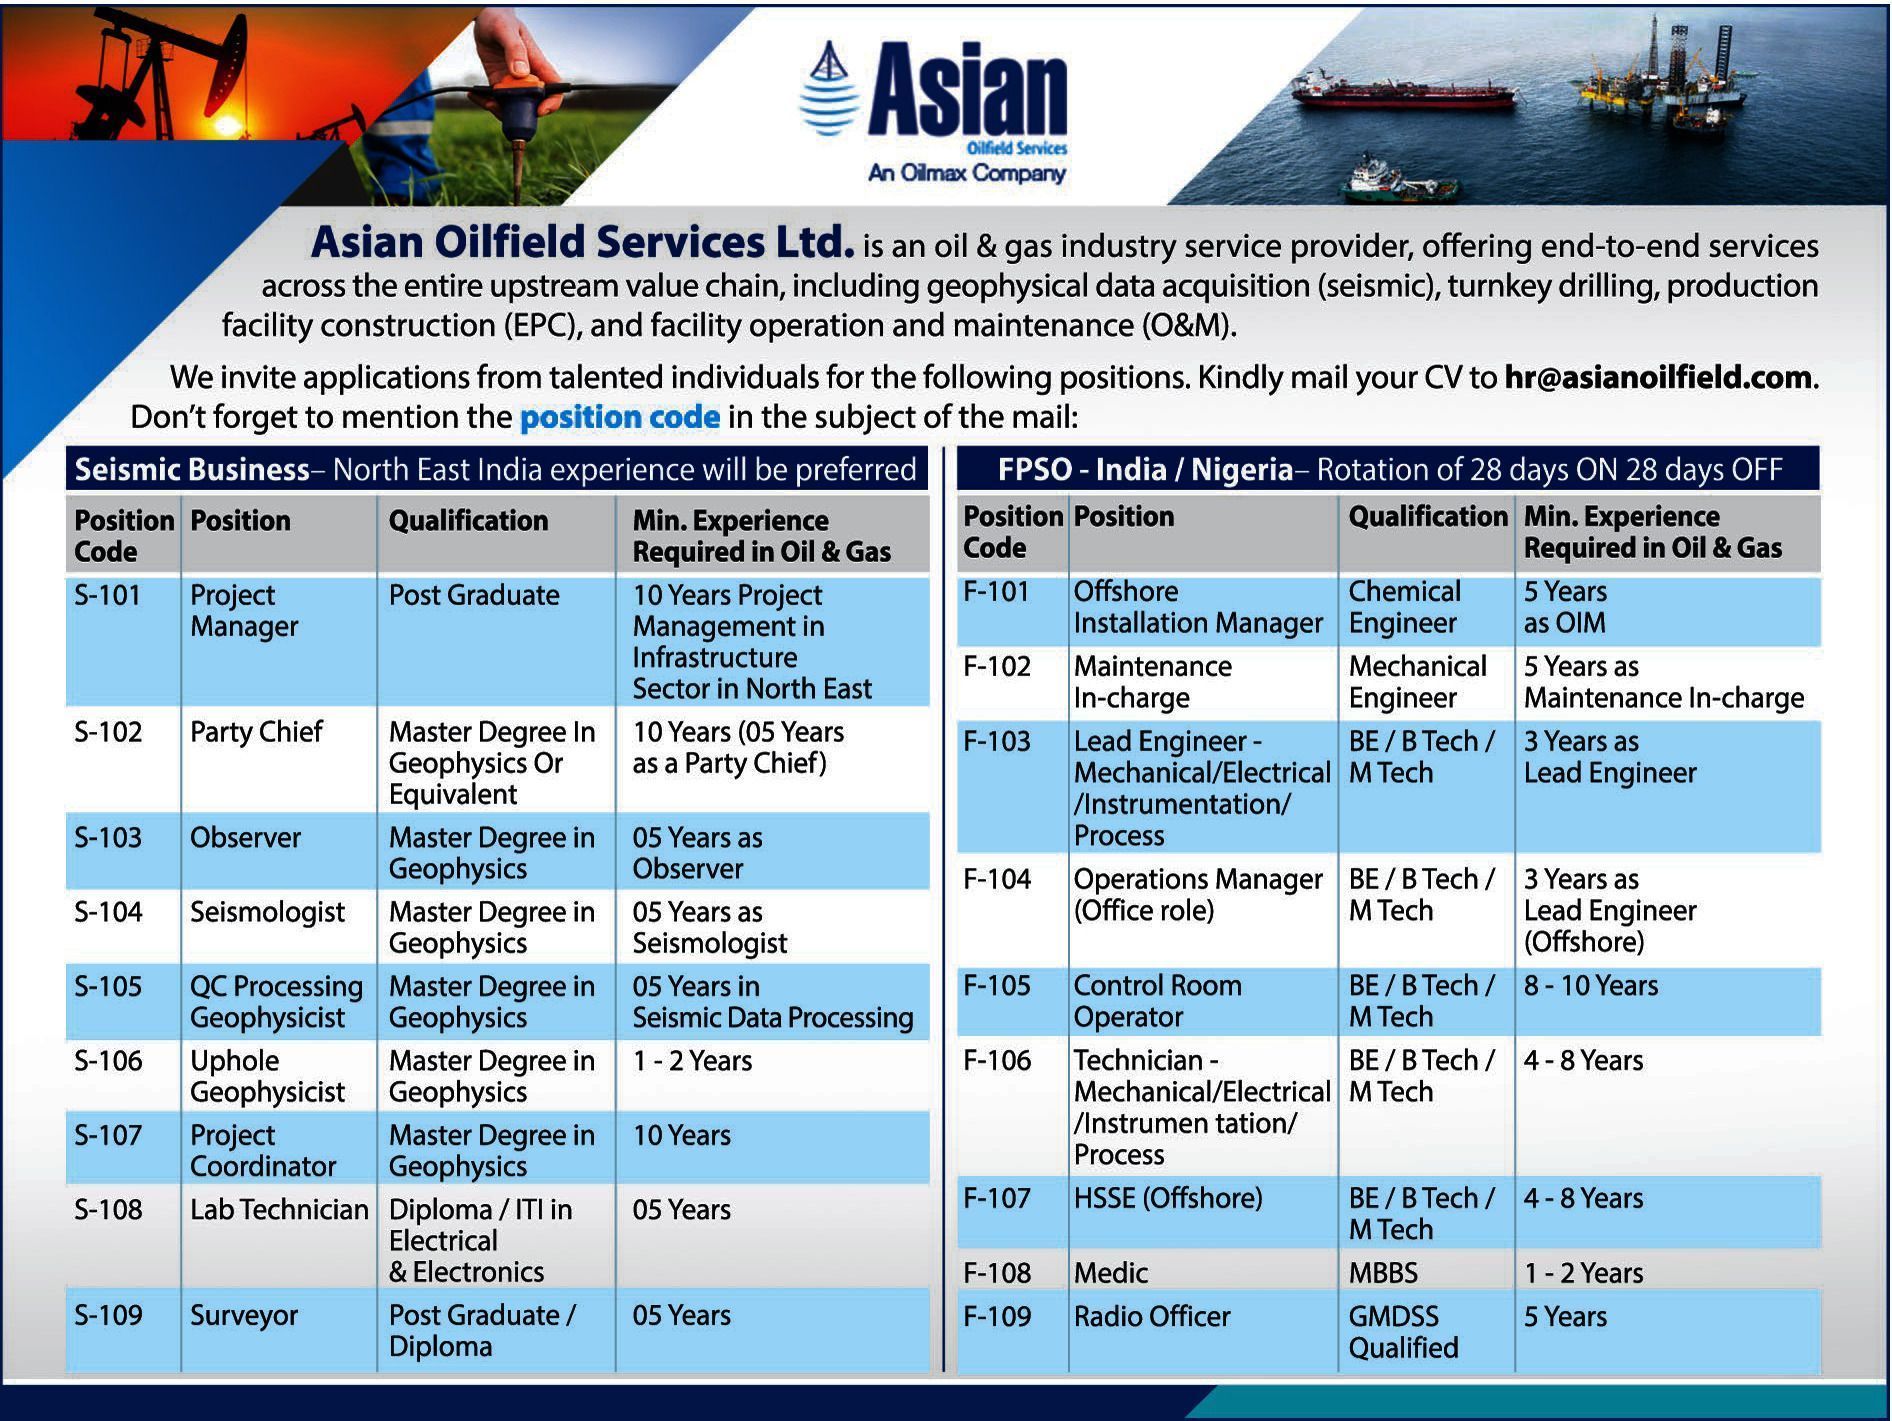 Asian oilfield services